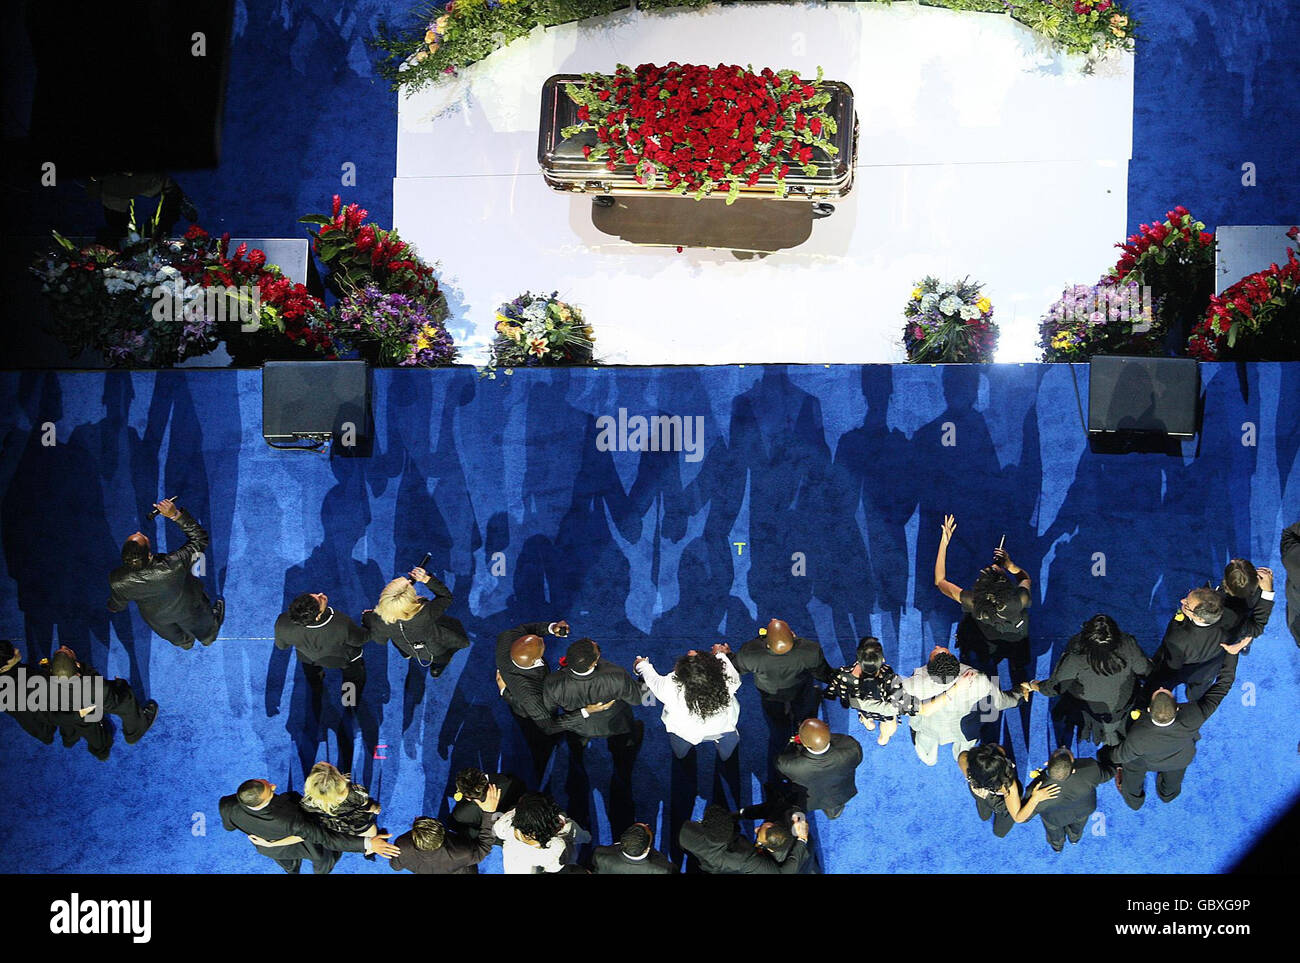 Family and friends sing 'We are the World' during at a memorial service for Michael Jackson at the Staples Center in Los Angeles. Stock Photo